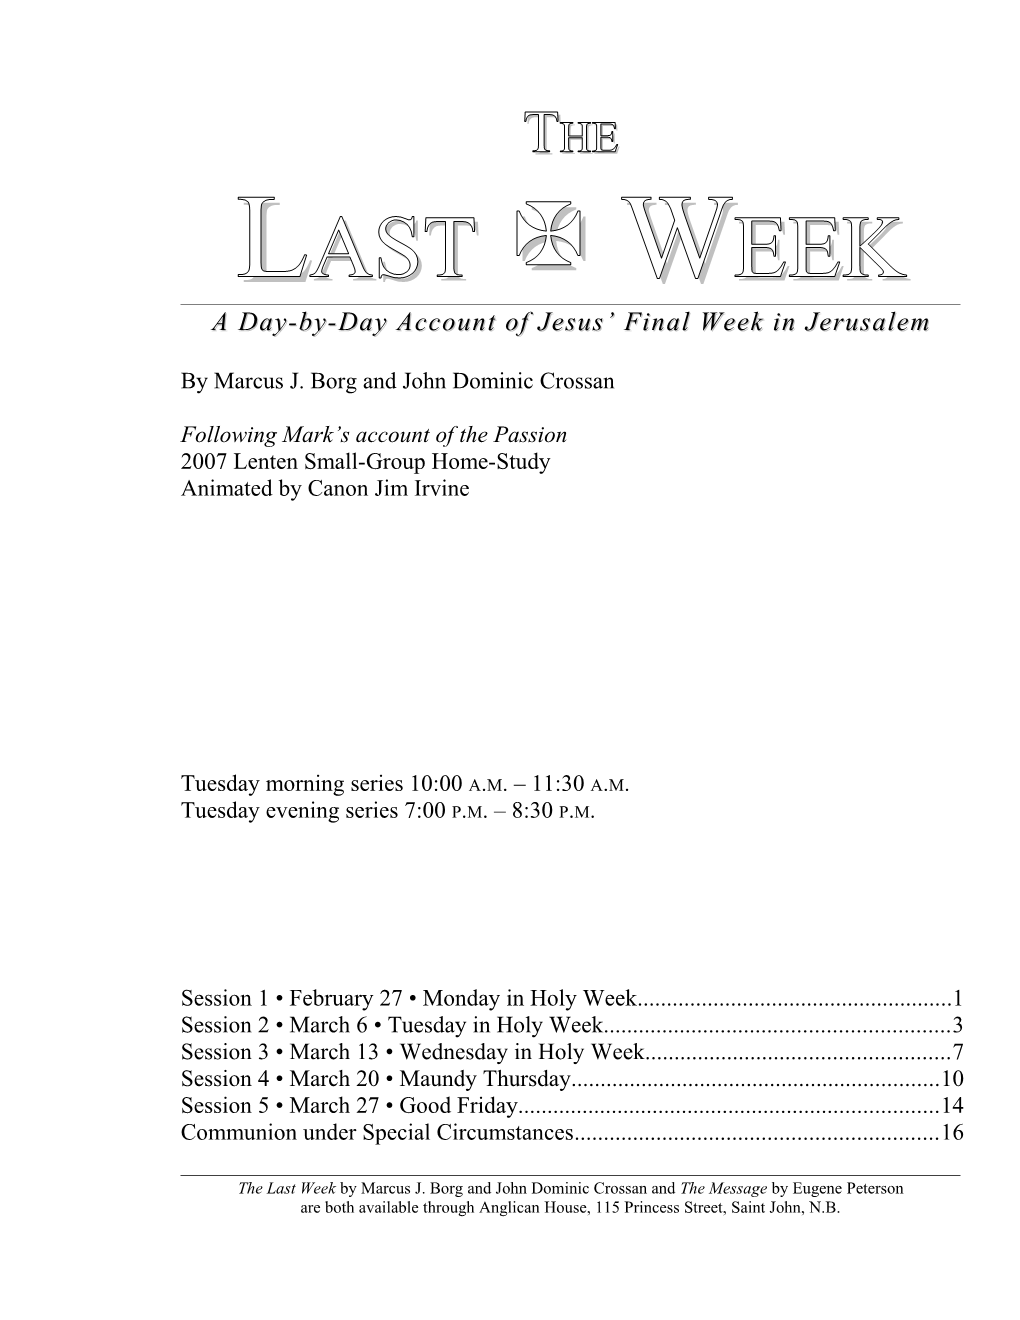 A Day-By-Day Account of Jesus Final Week in Jerusalem